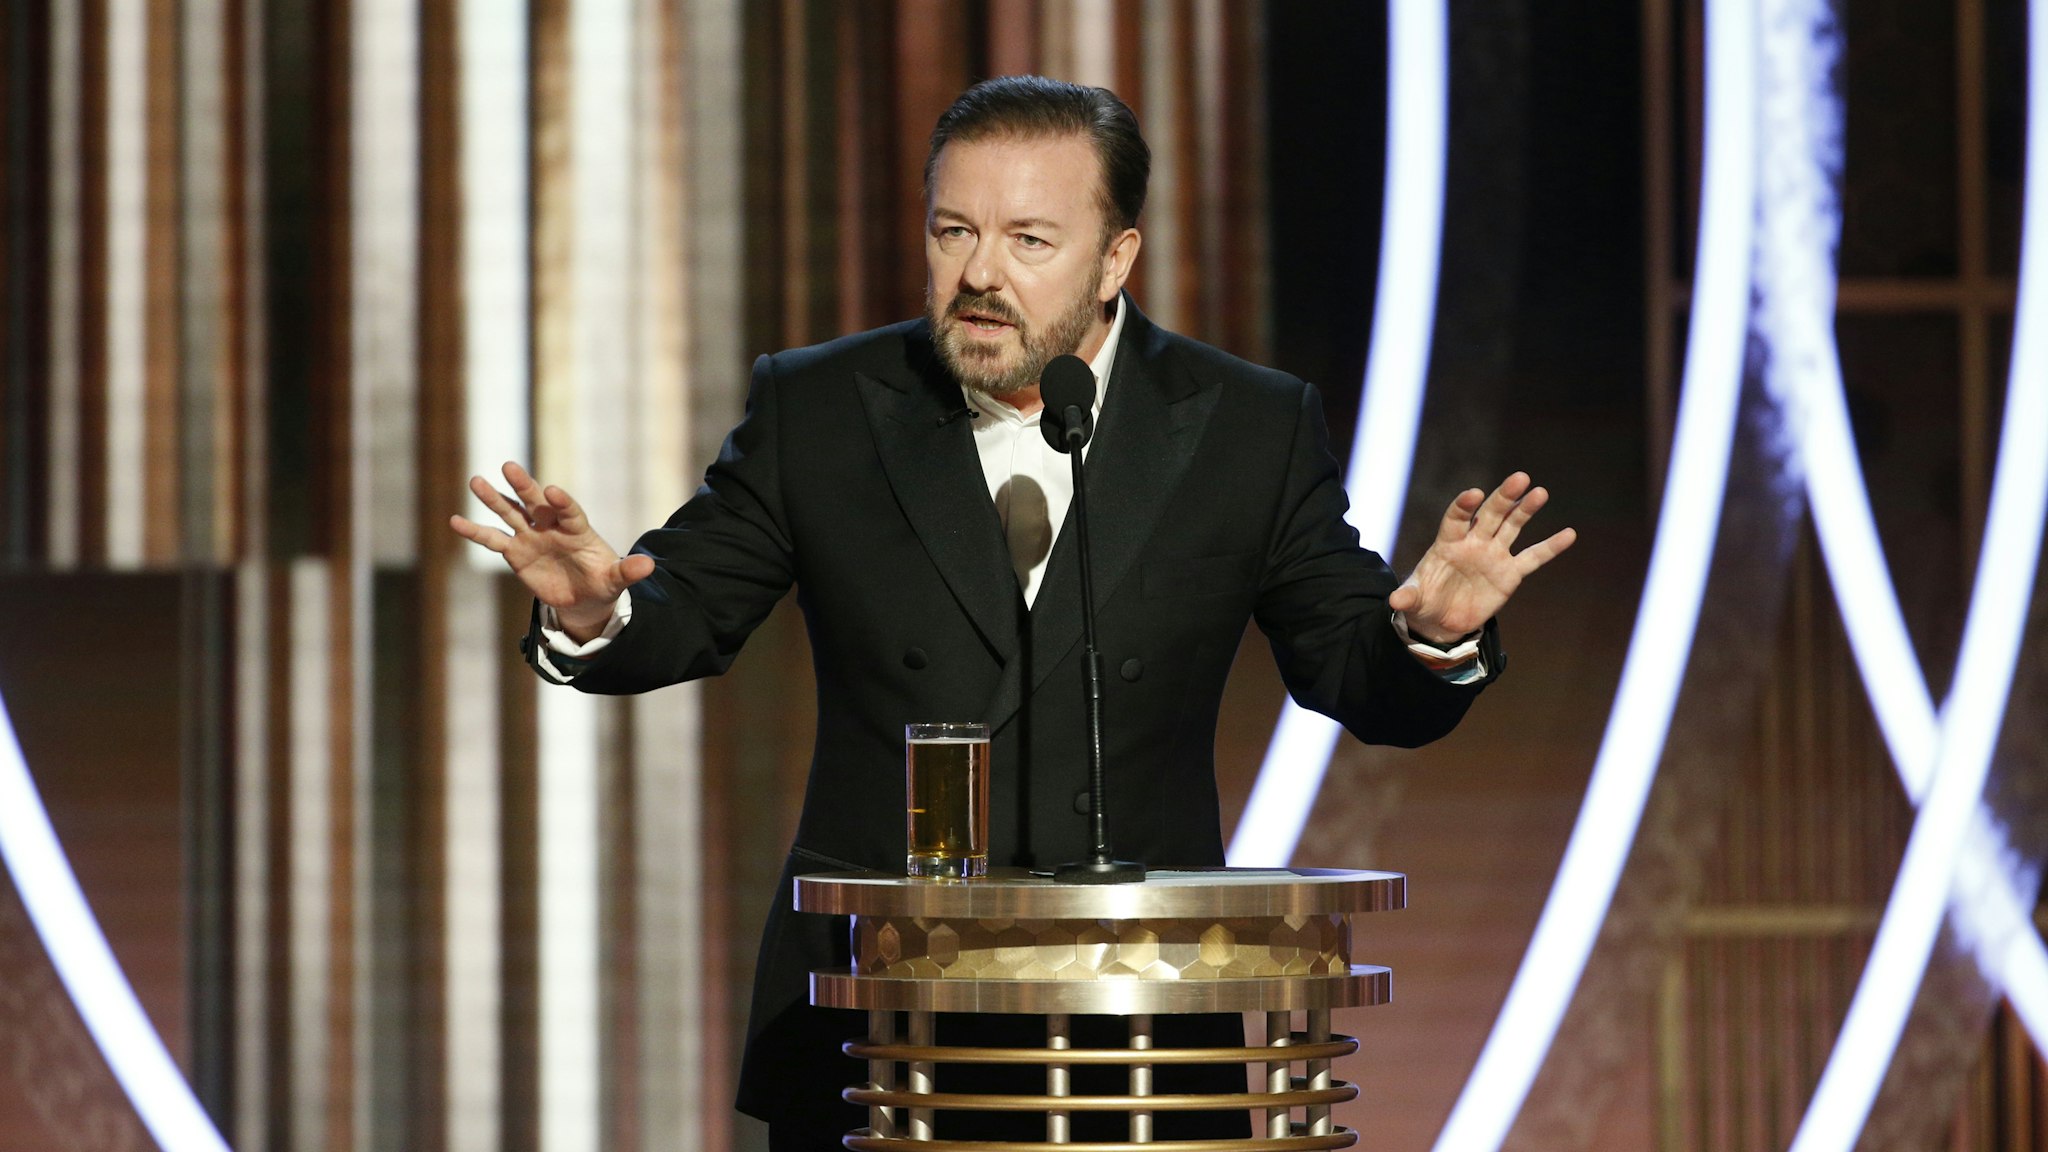 BEVERLY HILLS, CALIFORNIA - JANUARY 04: In this handout photo provided by NBCUniversal Media, LLC, host Ricky Gervais speaks onstage during the 76th Annual Golden Globe Awards at The Beverly Hilton Hotel on January 5, 2020 in Beverly Hills, California.